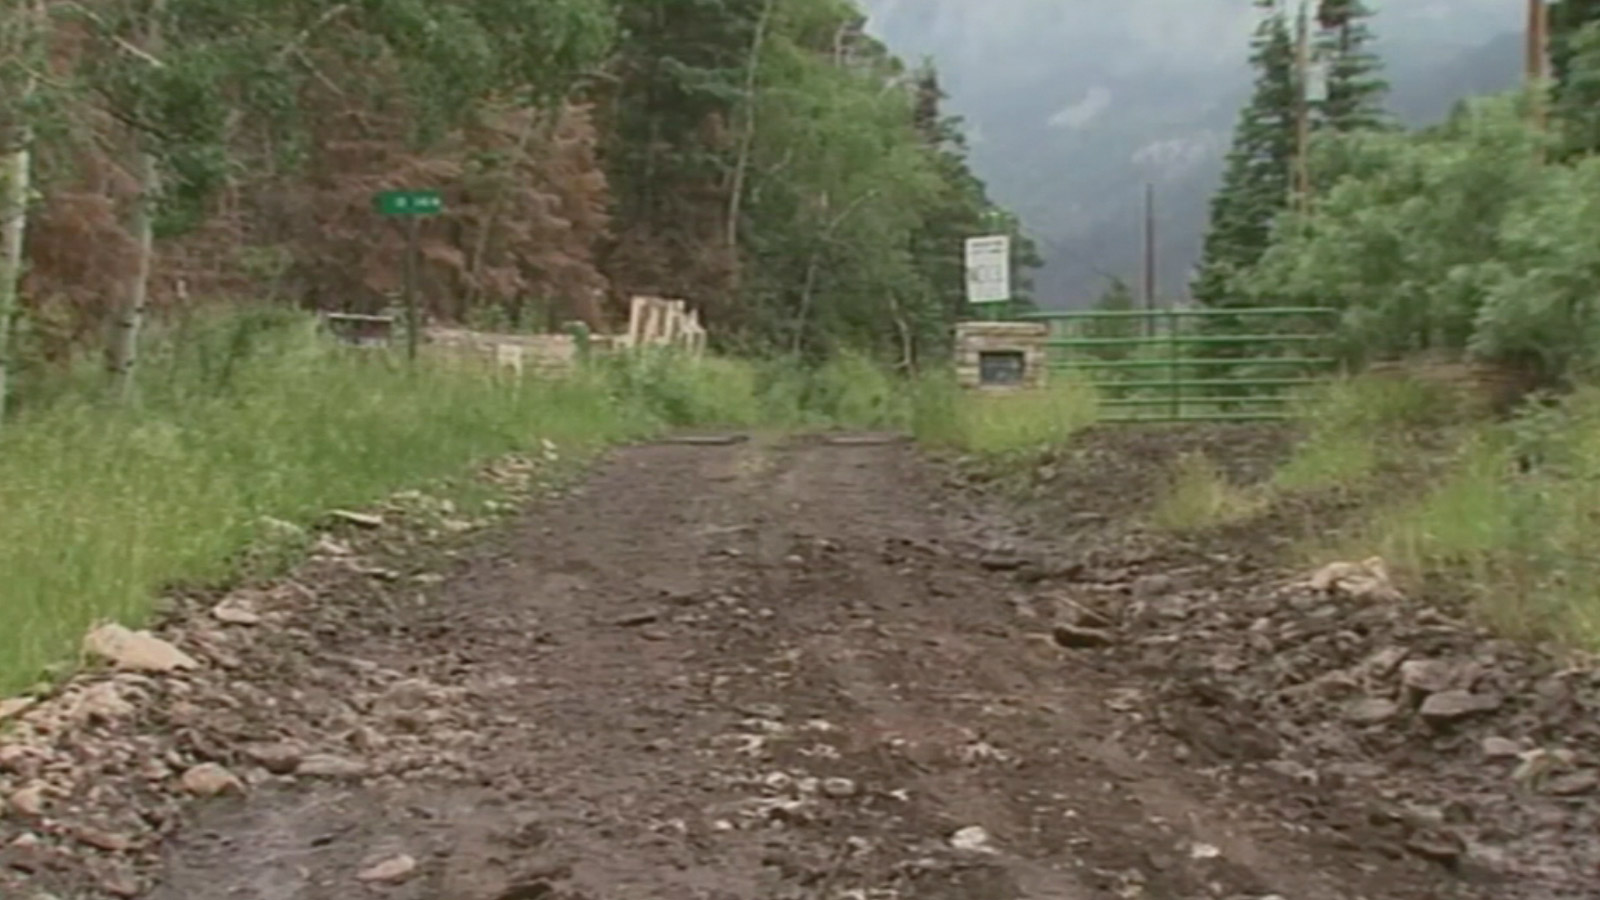 The Spanish Peaks Scout Ranch (credit: CBS)